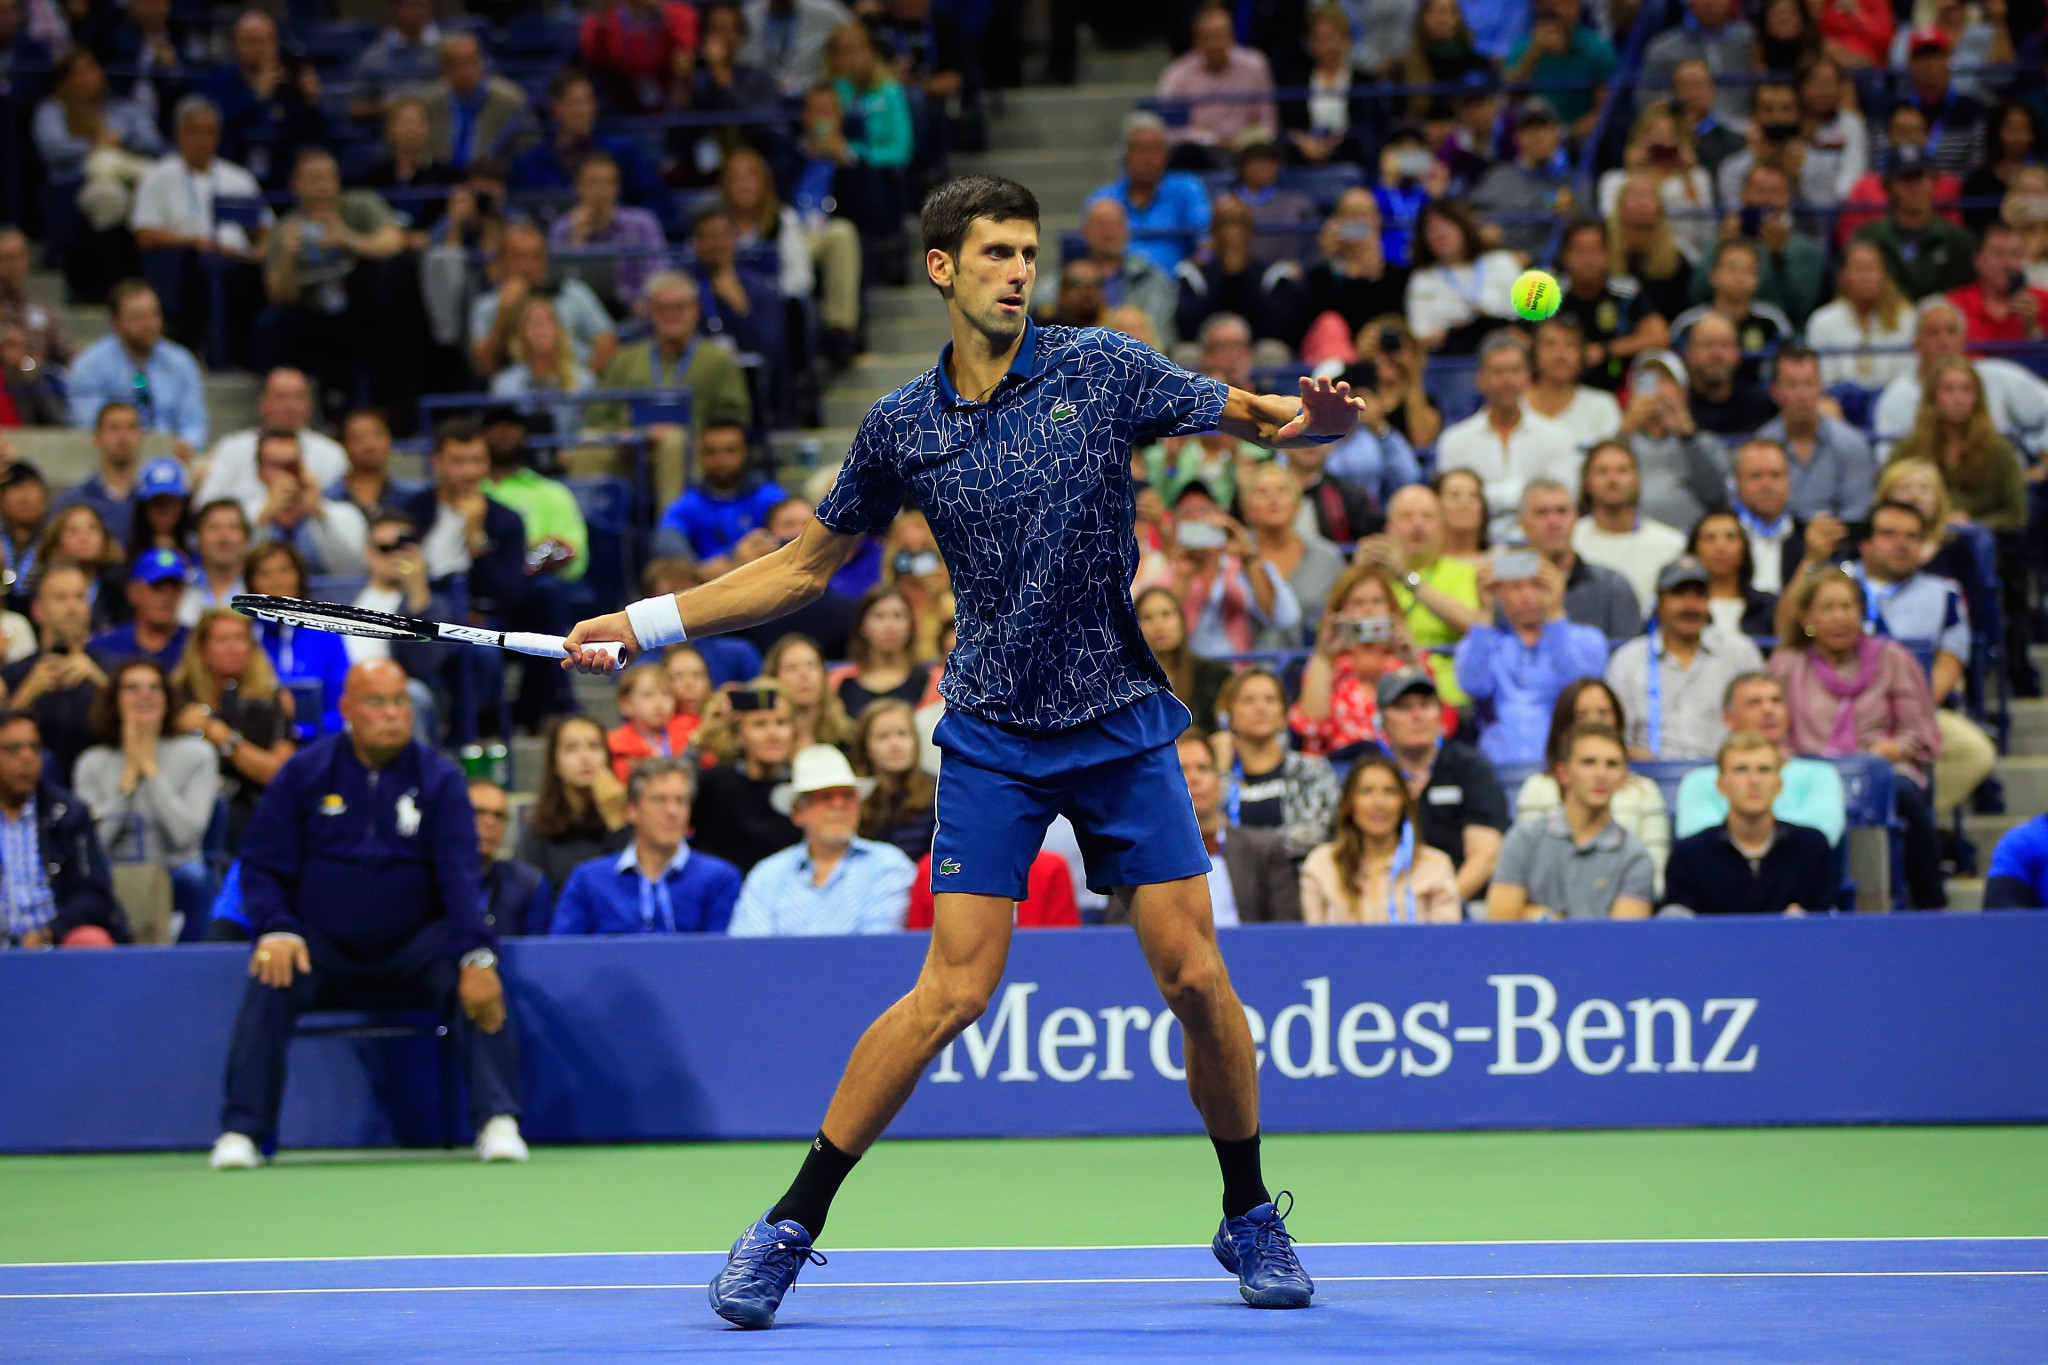 Novak Djokovic produced a ruthless display to defeat Argentina's Juan Martin del Potro ©Getty Images